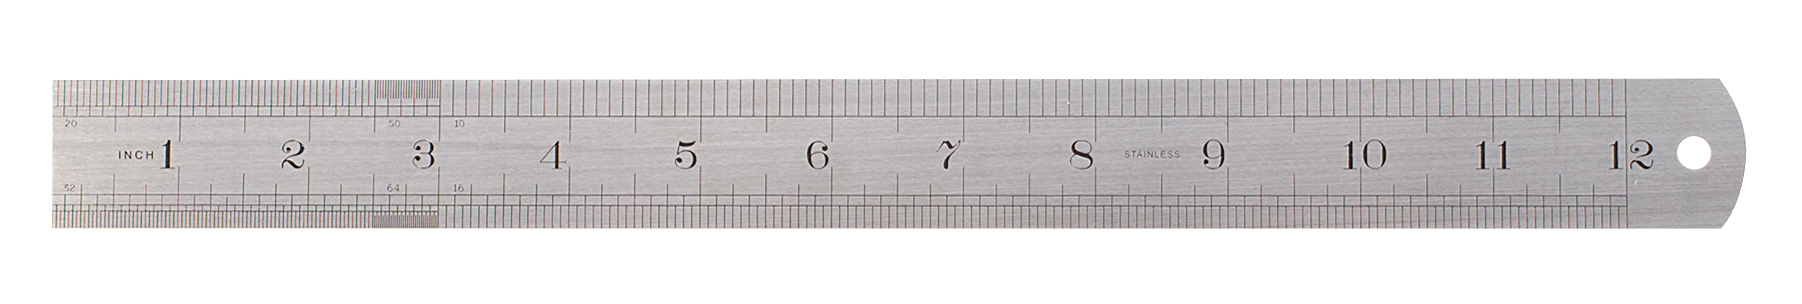 12" /300 mm Steel Ruler with Conversion Table